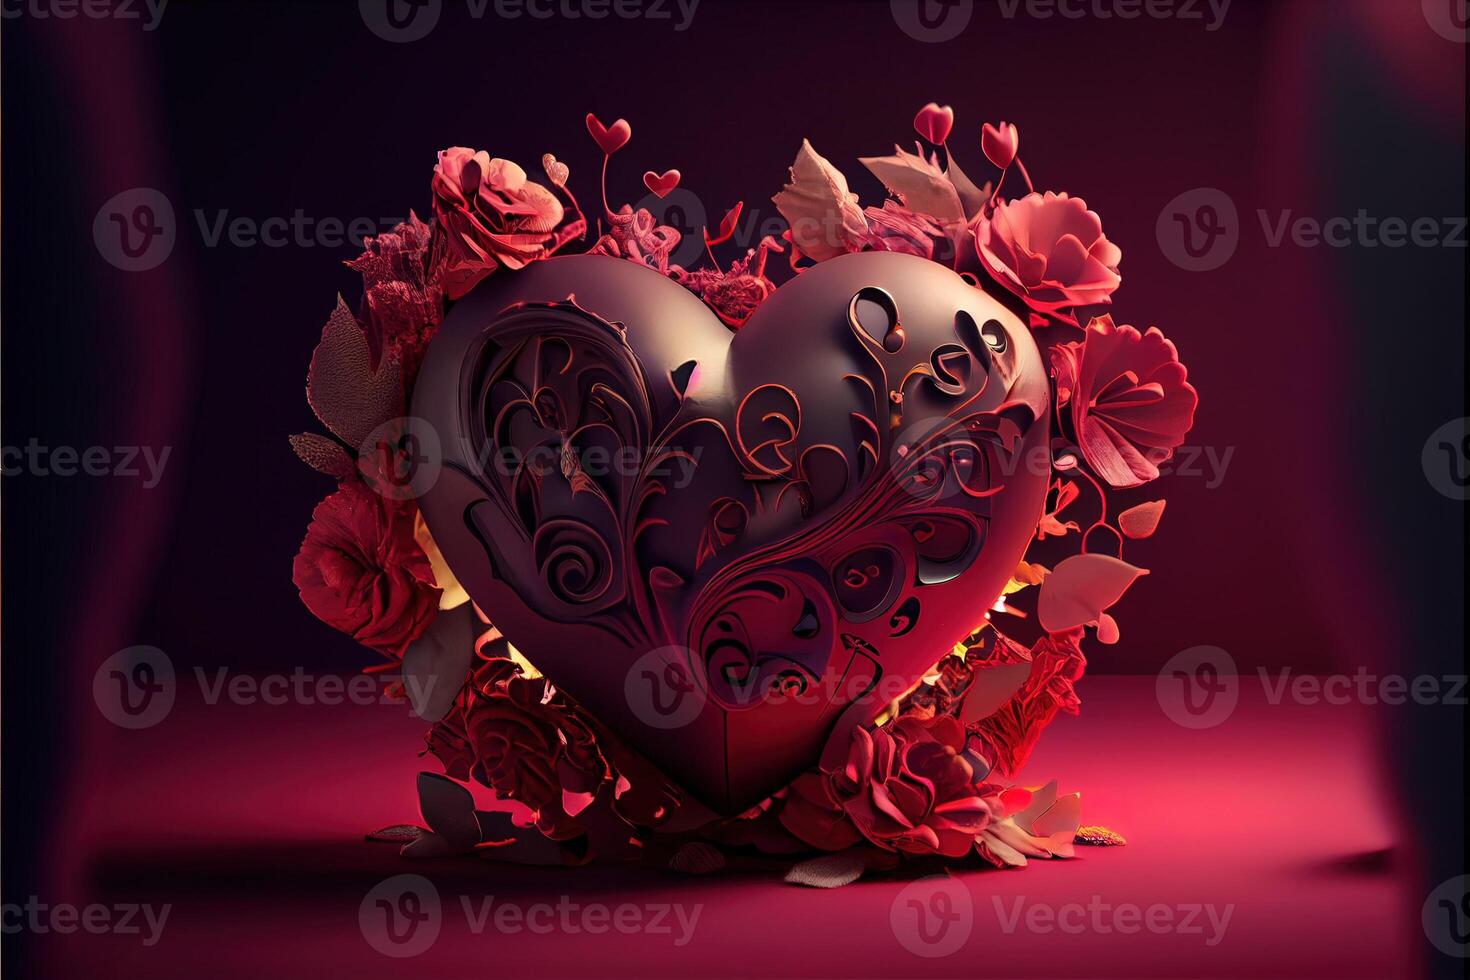 illustration of Valentine day background, love, romantic concept, heart shape. Neural network generated art. Digitally generated image. Not based on any actual scene or pattern. photo